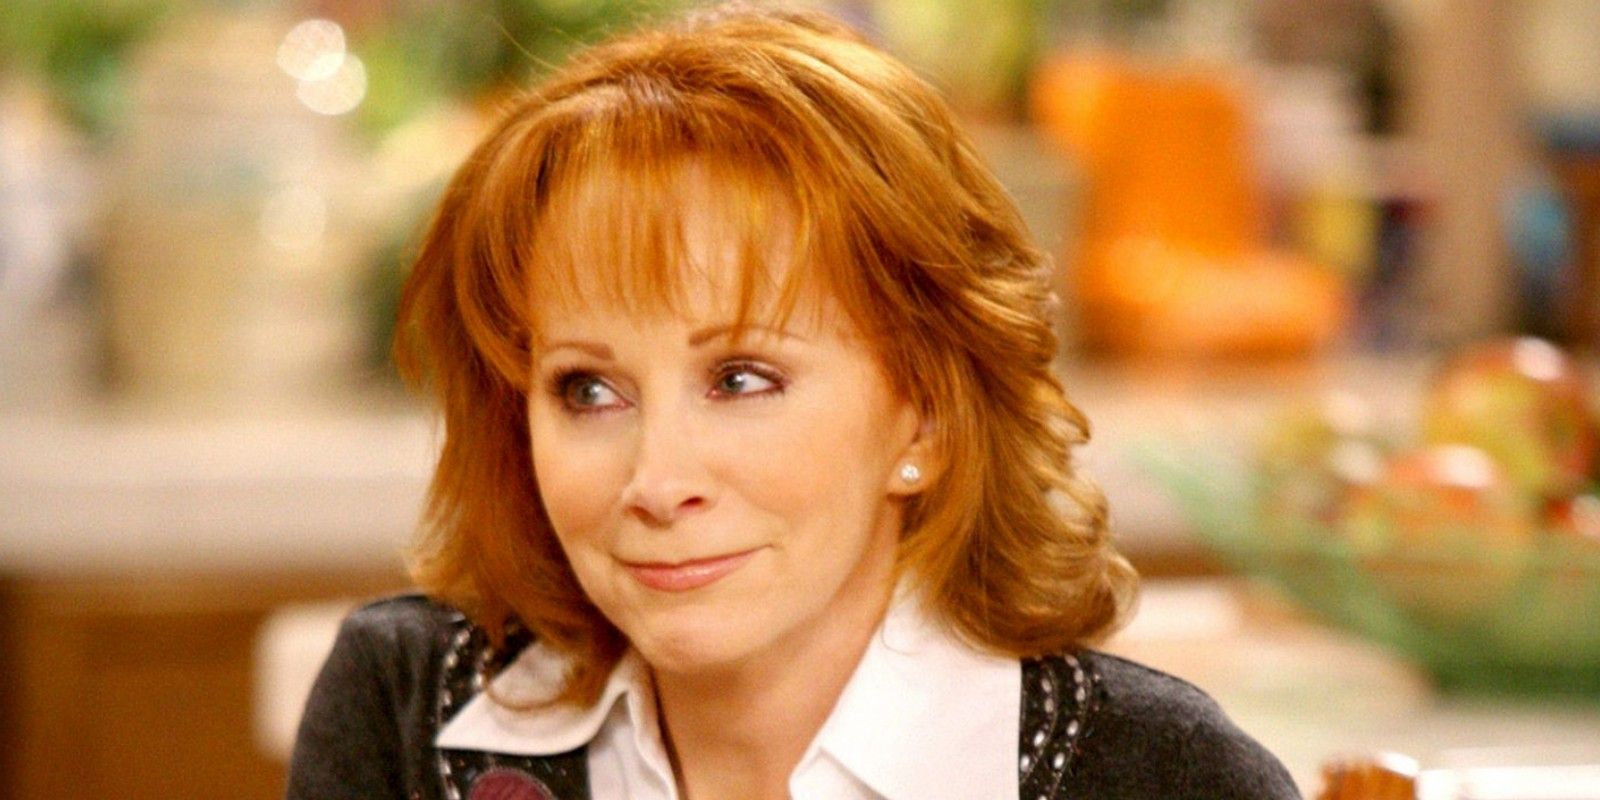 An image of Reba McEntire smiling